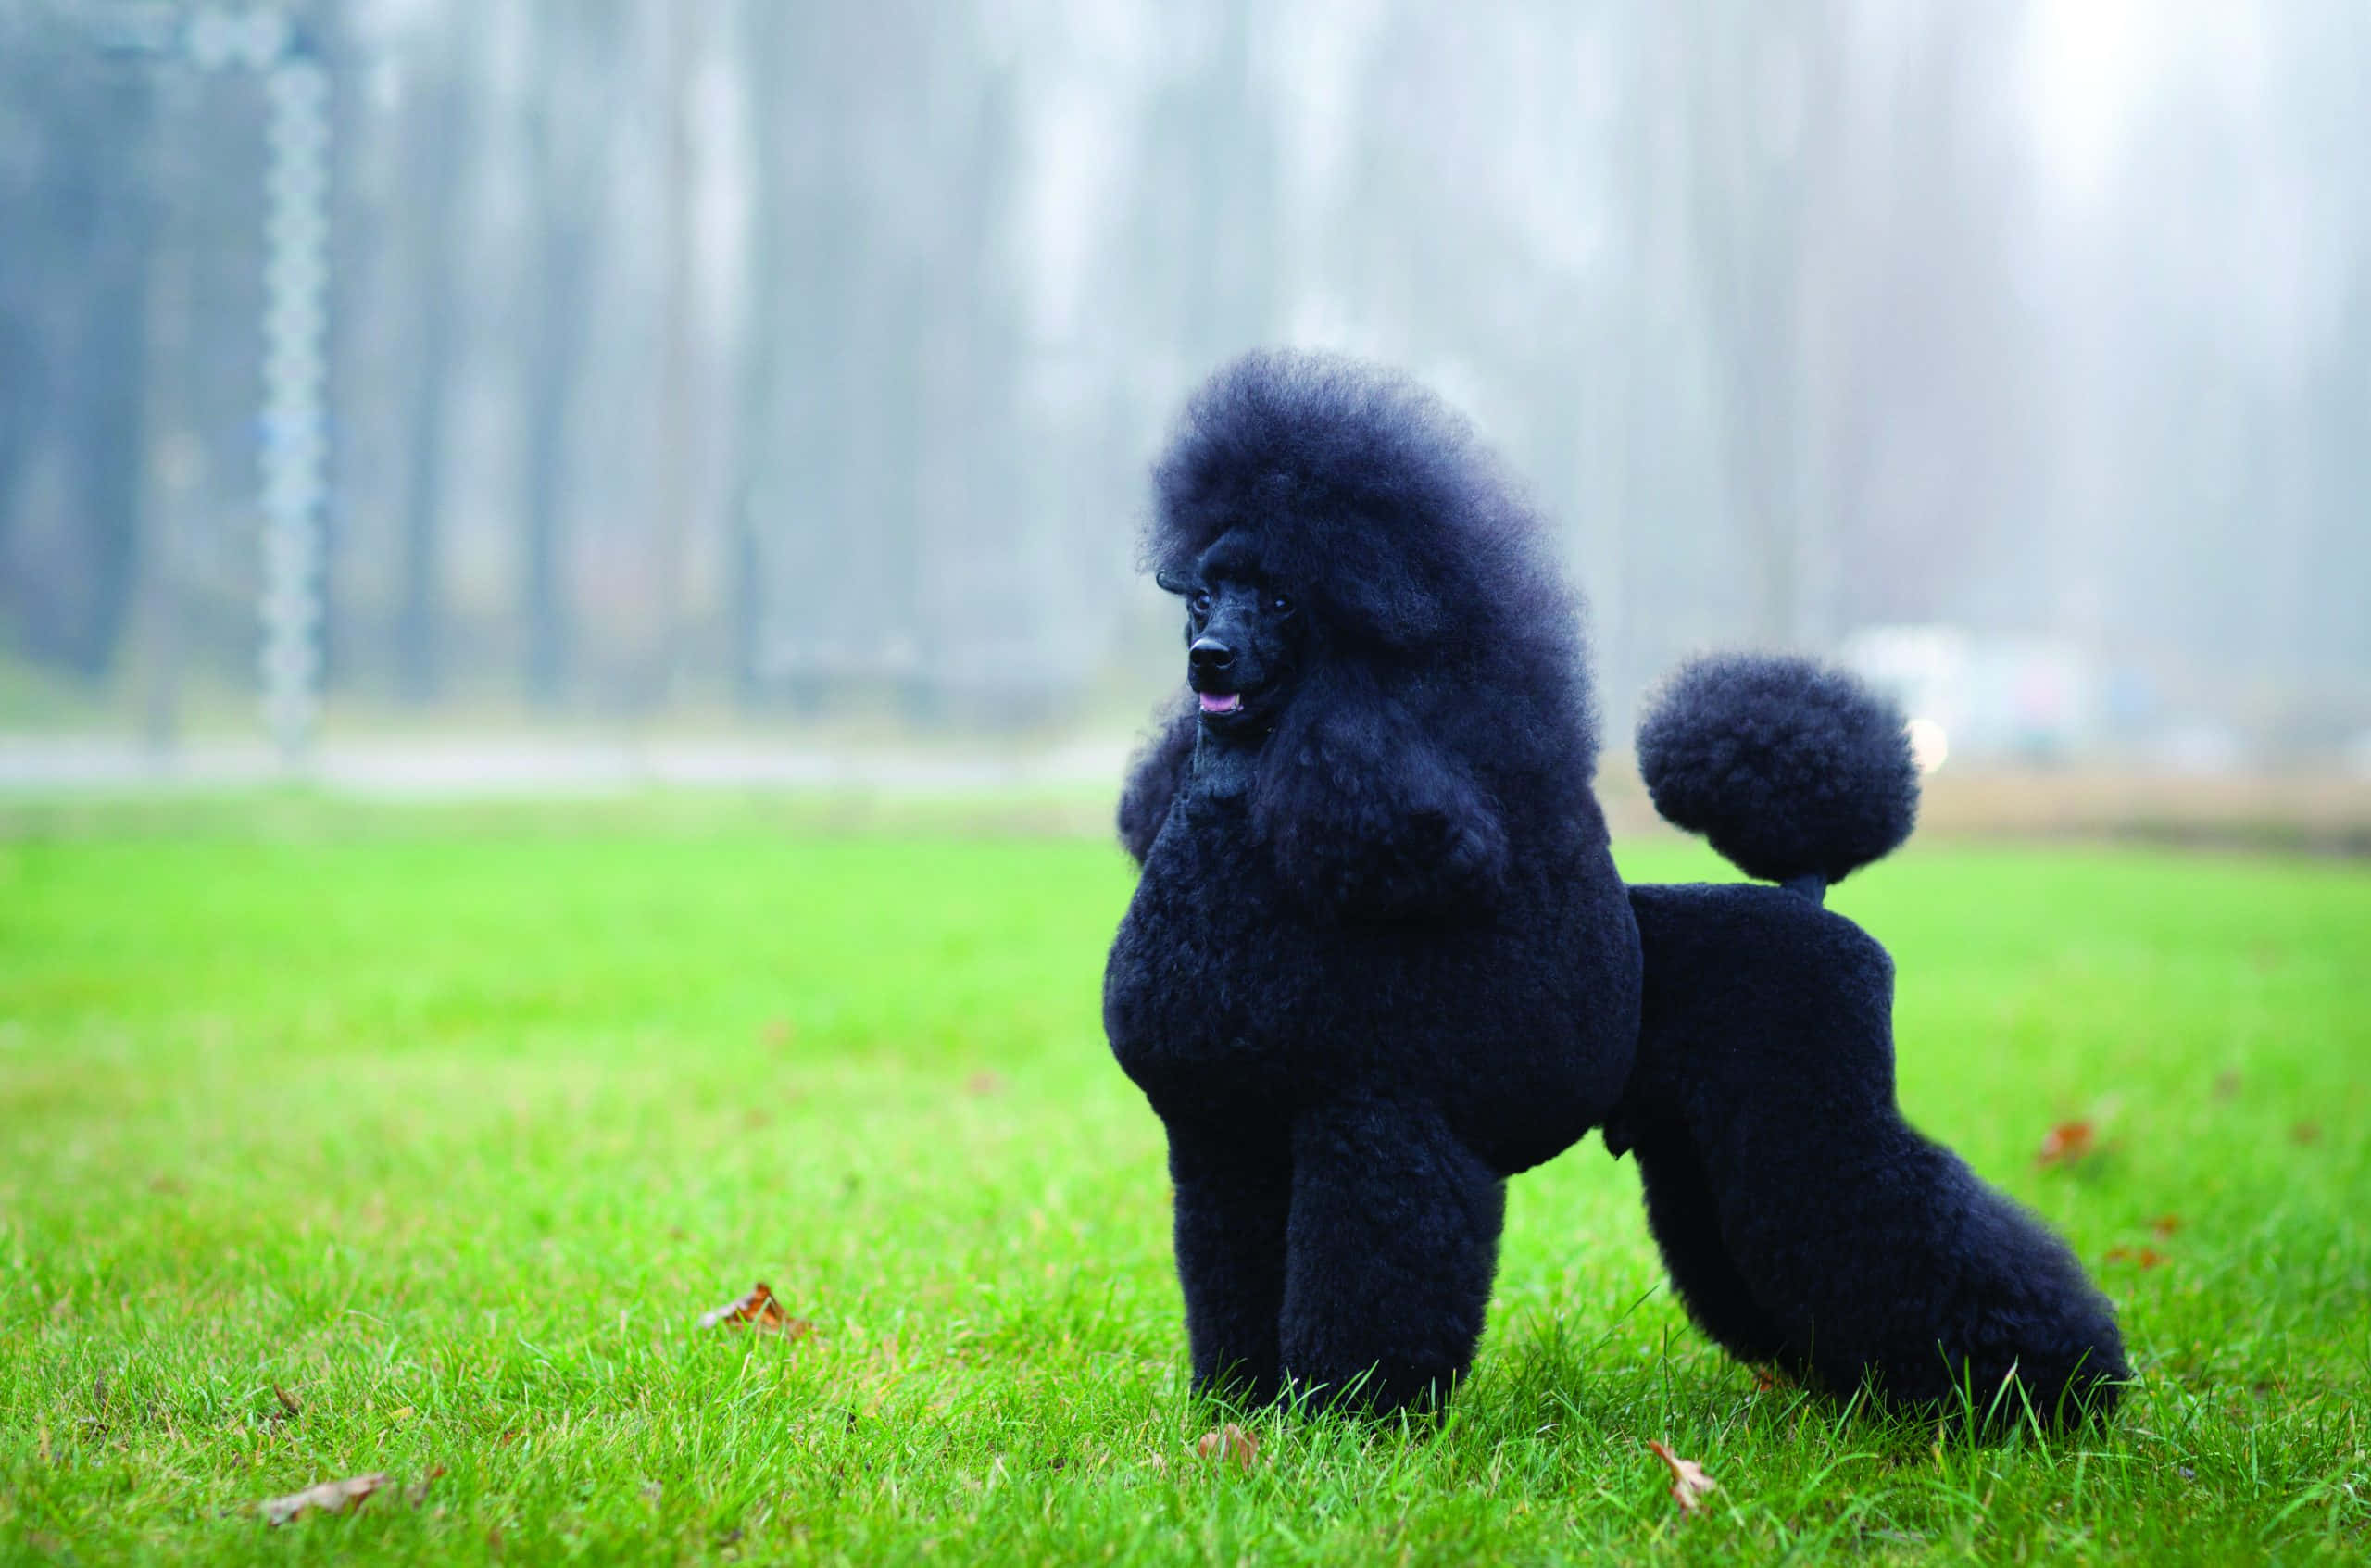 A playful poodle enjoying a walk in the park